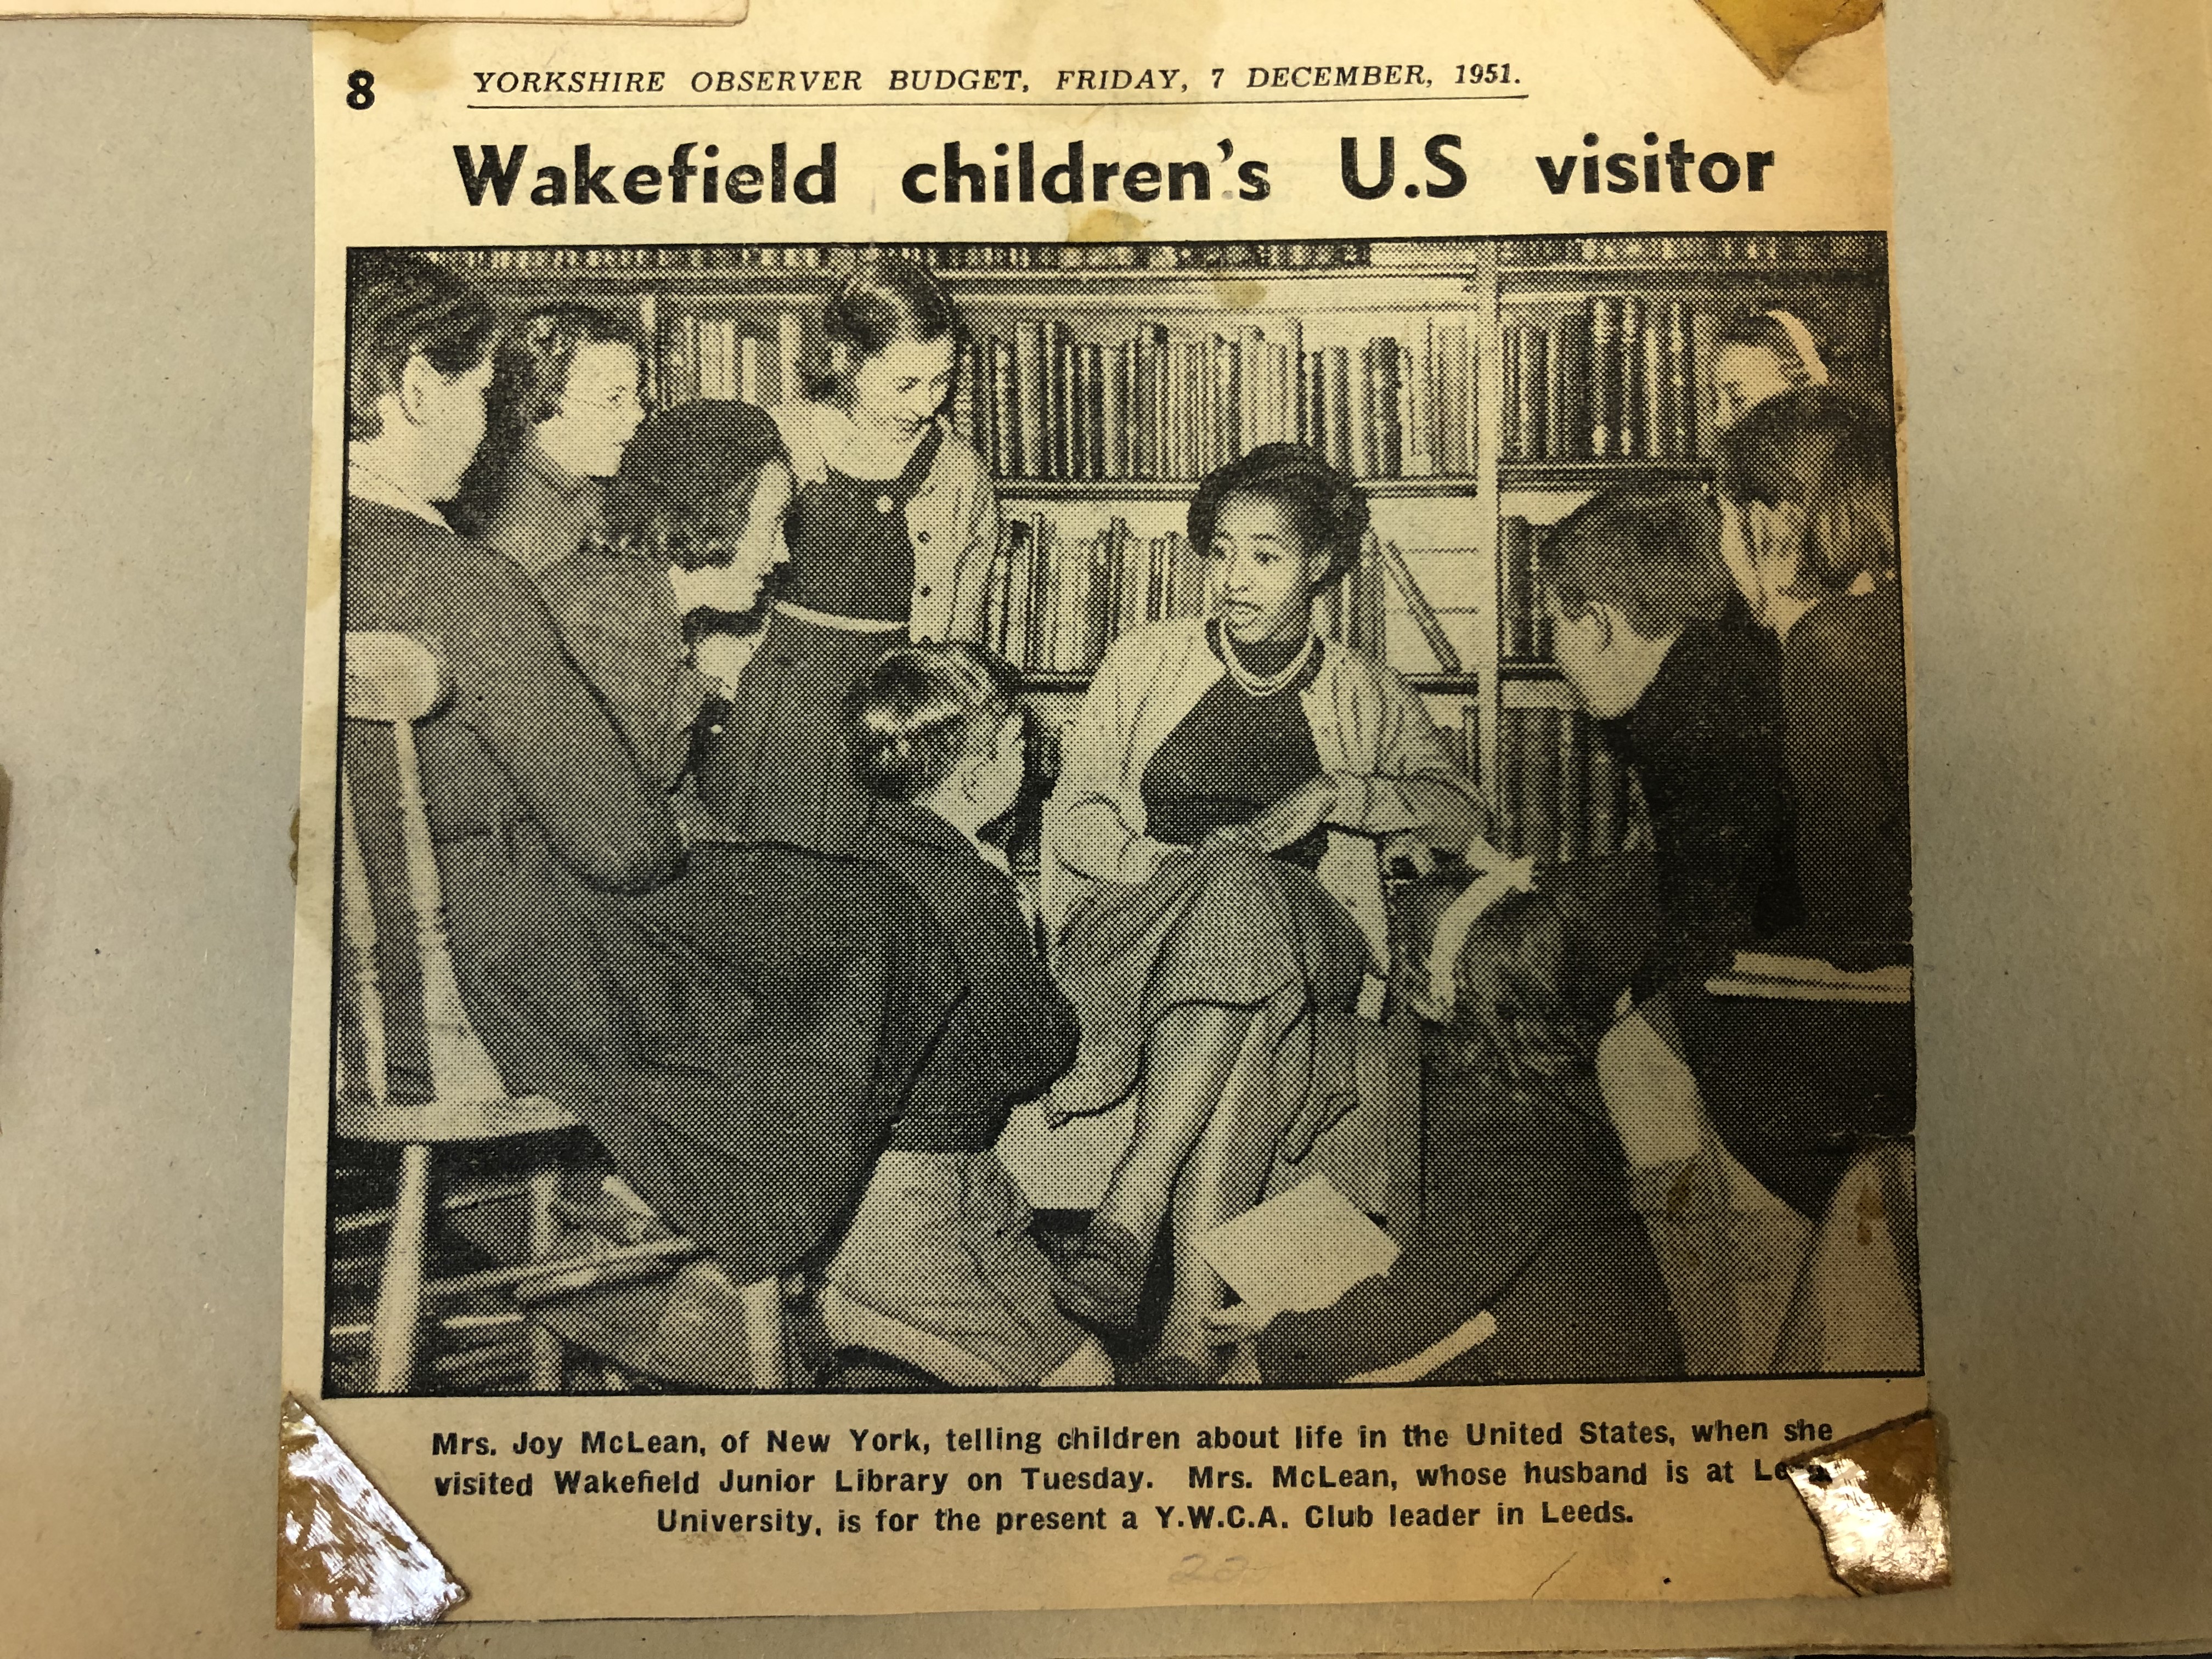 Joy McLean sits with children in the library